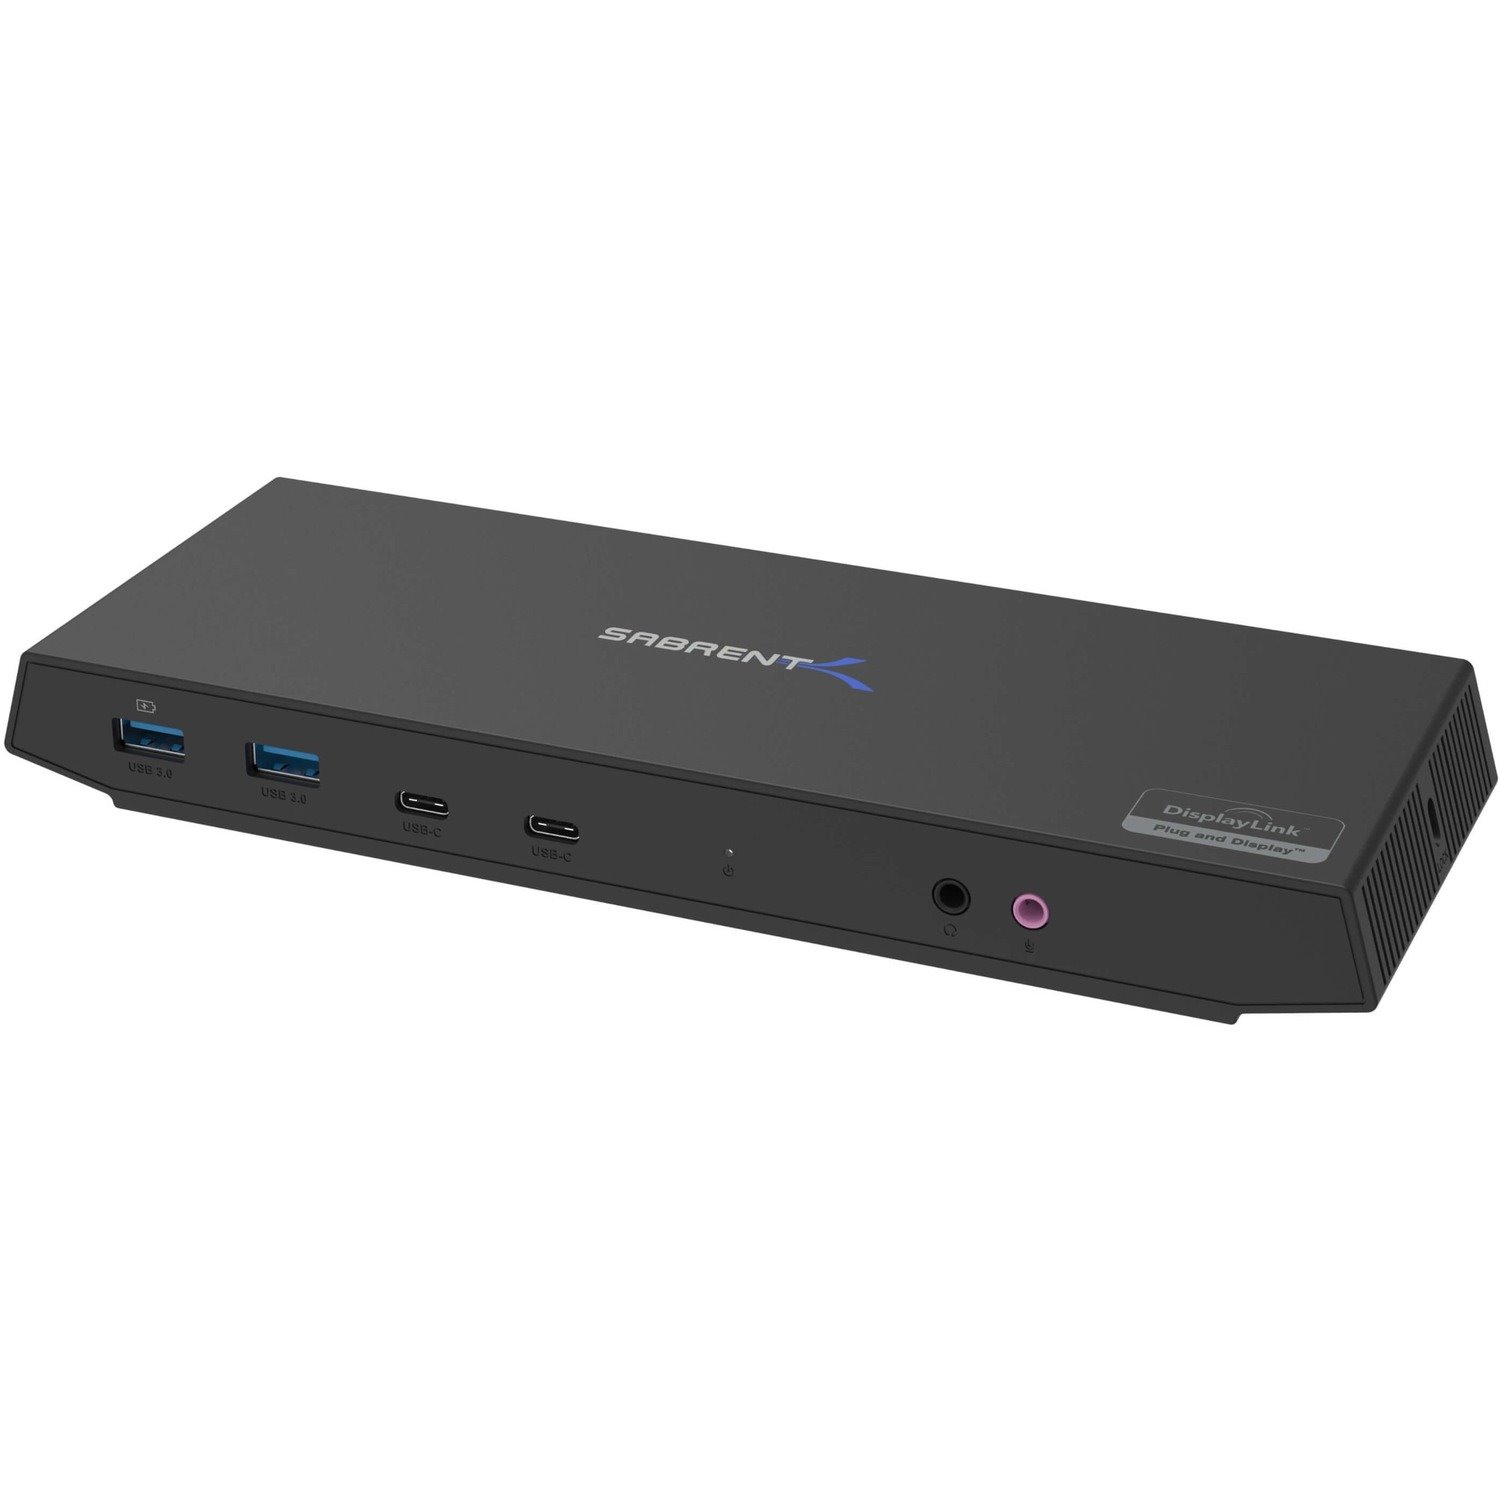 Sabrent USB Type-C Dual 4K Universal Docking Station with USB C Power Delivery (DS-WSPD)